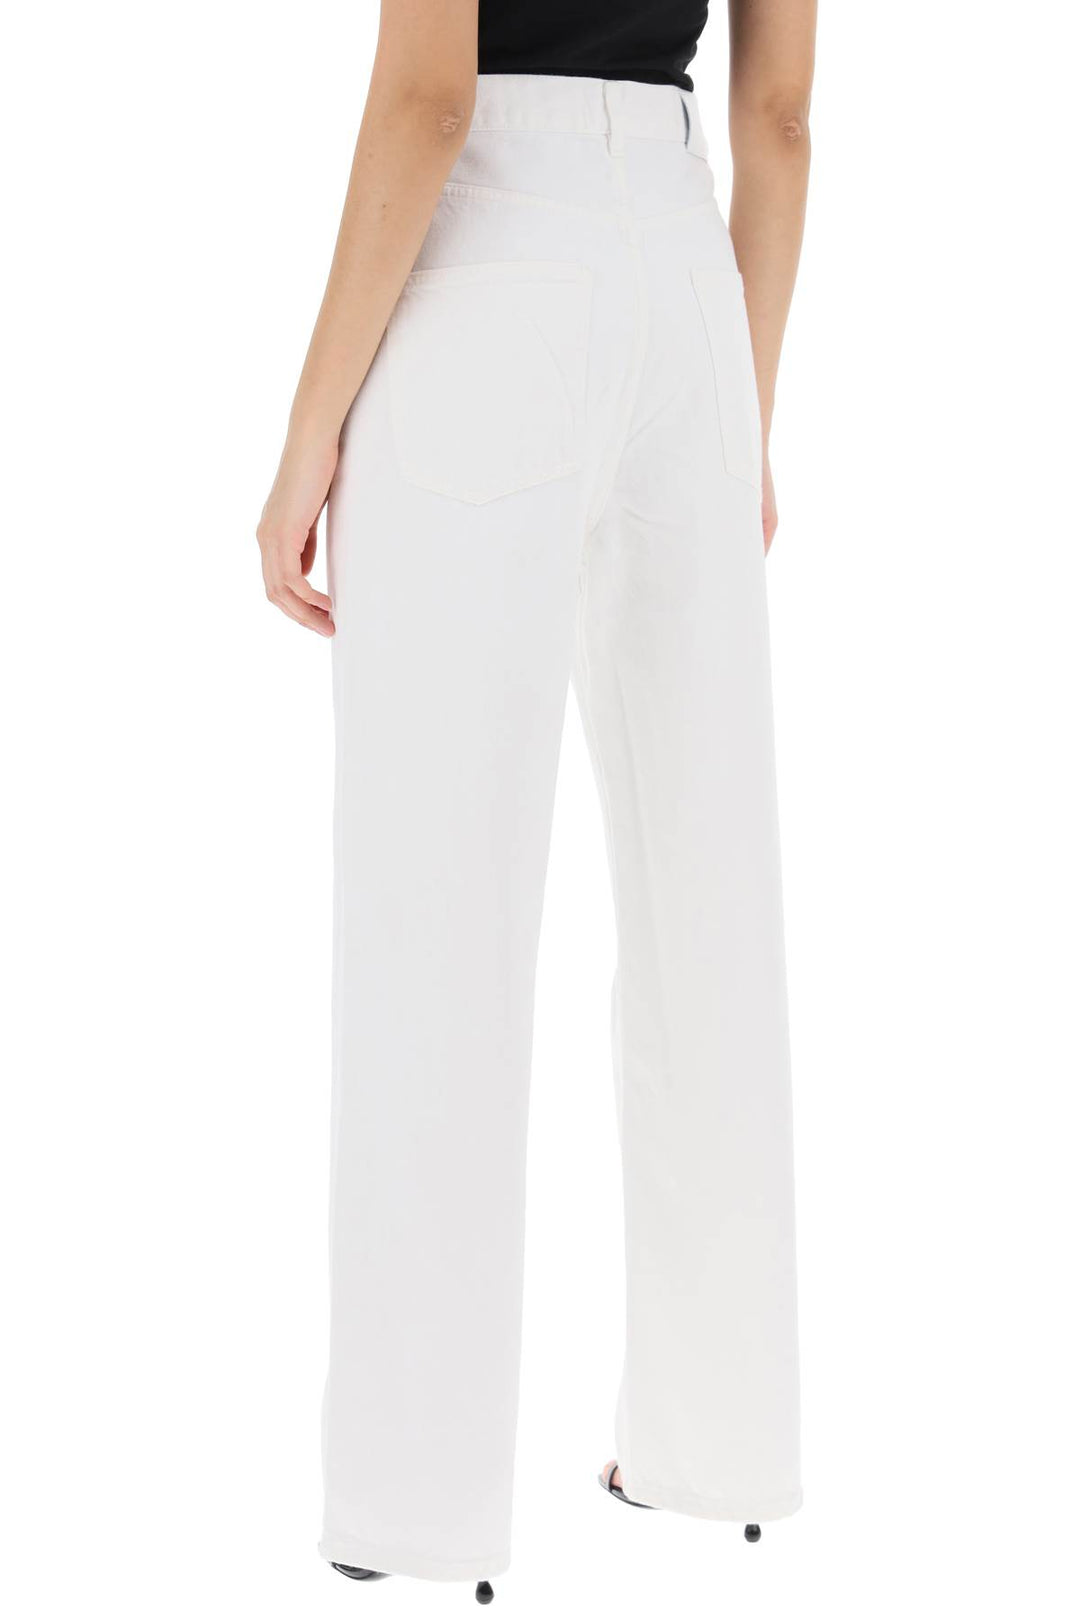 Wardrobe.Nyc Low Waisted Loose Fit Jeans   White